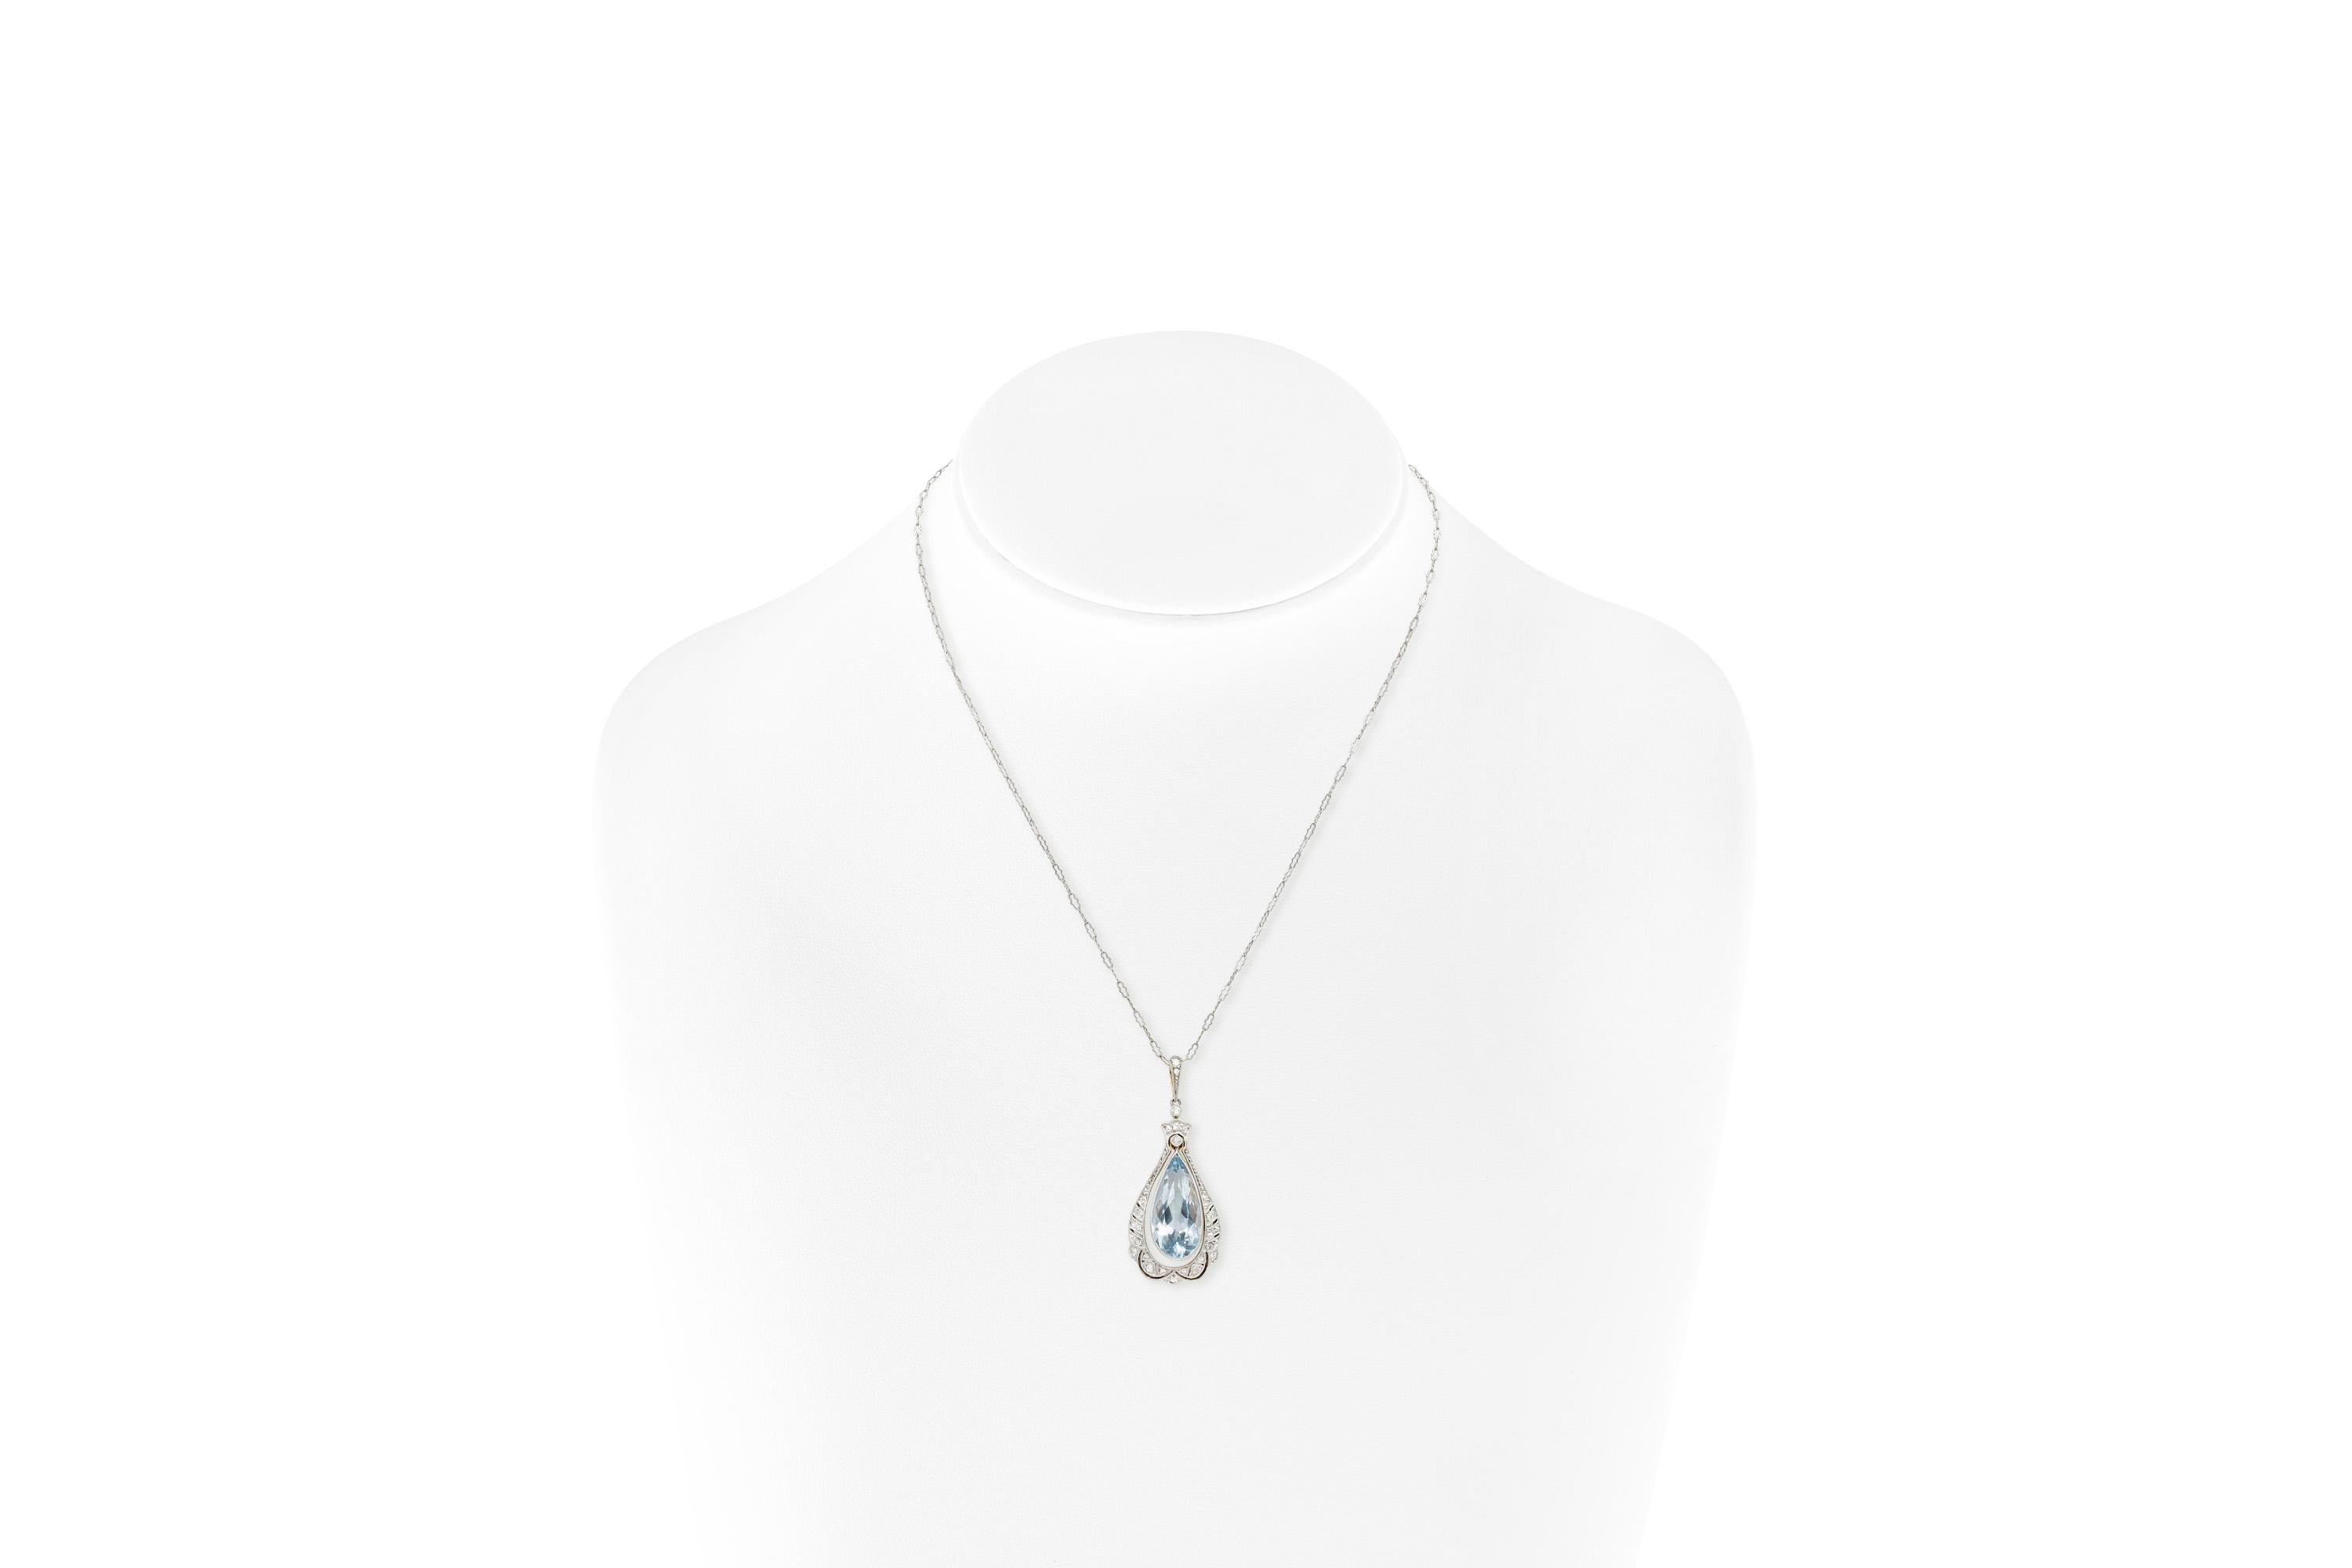 Finley crafted in 14k white gold with a Pear-Shaped Aquamarine weighing approximately 7.00 carats.
The pendant features diamonds weighing approximately a total of 0.40 carats.
Edwardian, circa 1910s